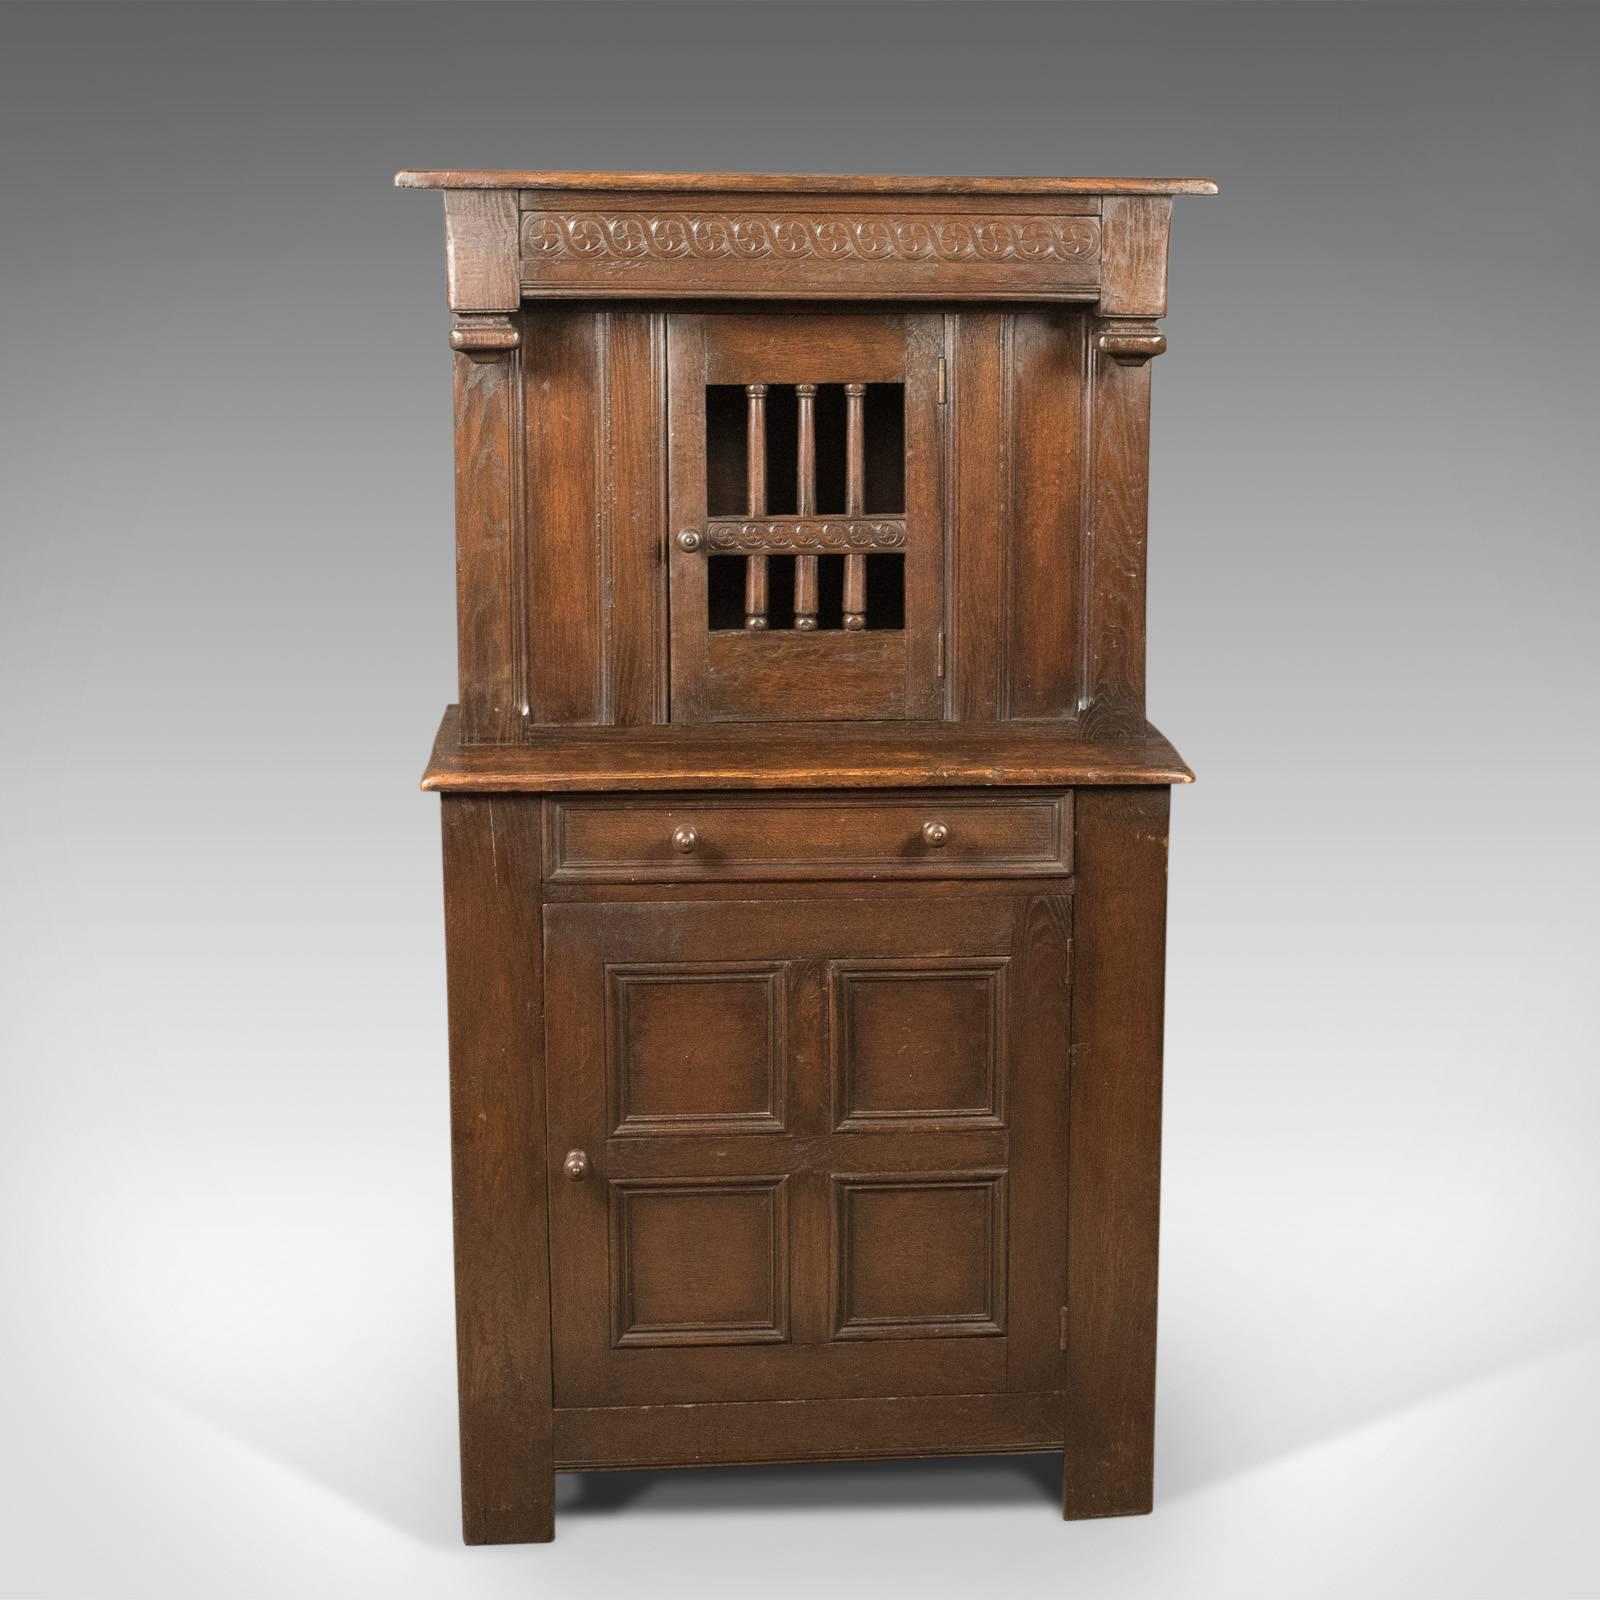 A handsome antique court cupboard crafted during the Edwardian period in the Elizabethan taste. English, oak and dating to circa 1910.

Presented in dark oak decorated with bands of reciprocating guilloché carving
Raised on extended stiles